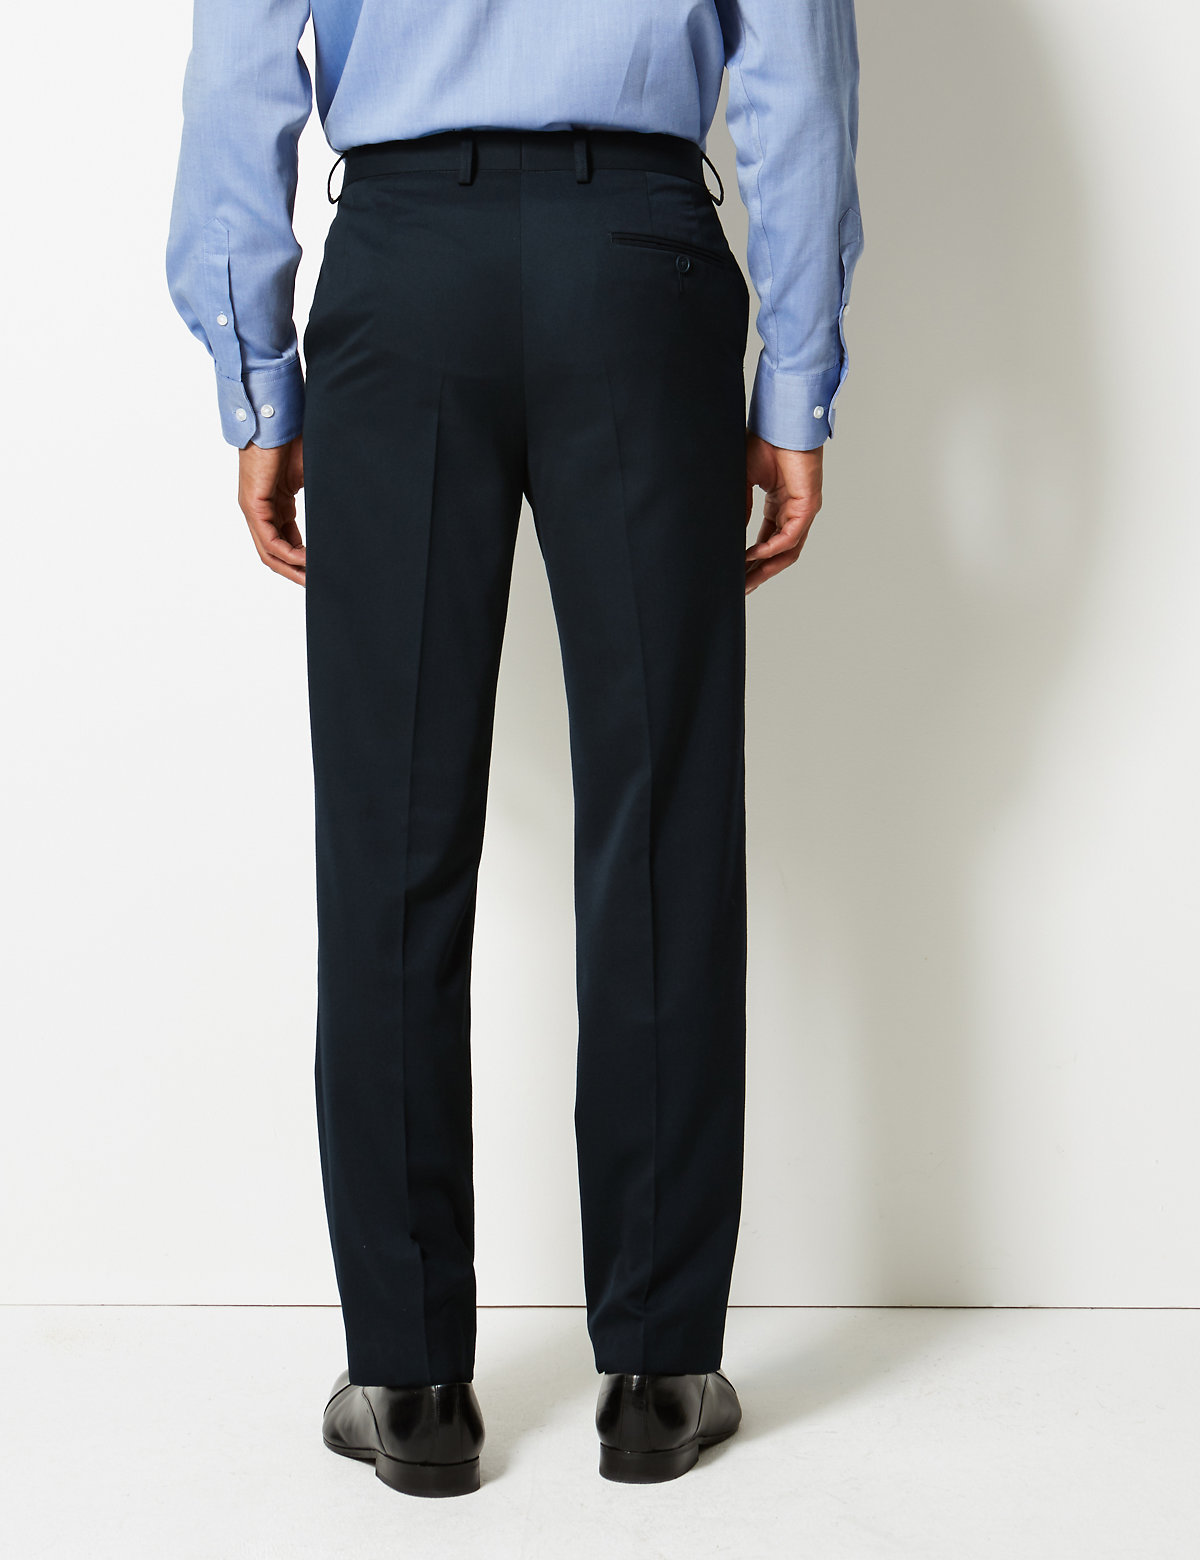 Navy Regular Fit Trousers